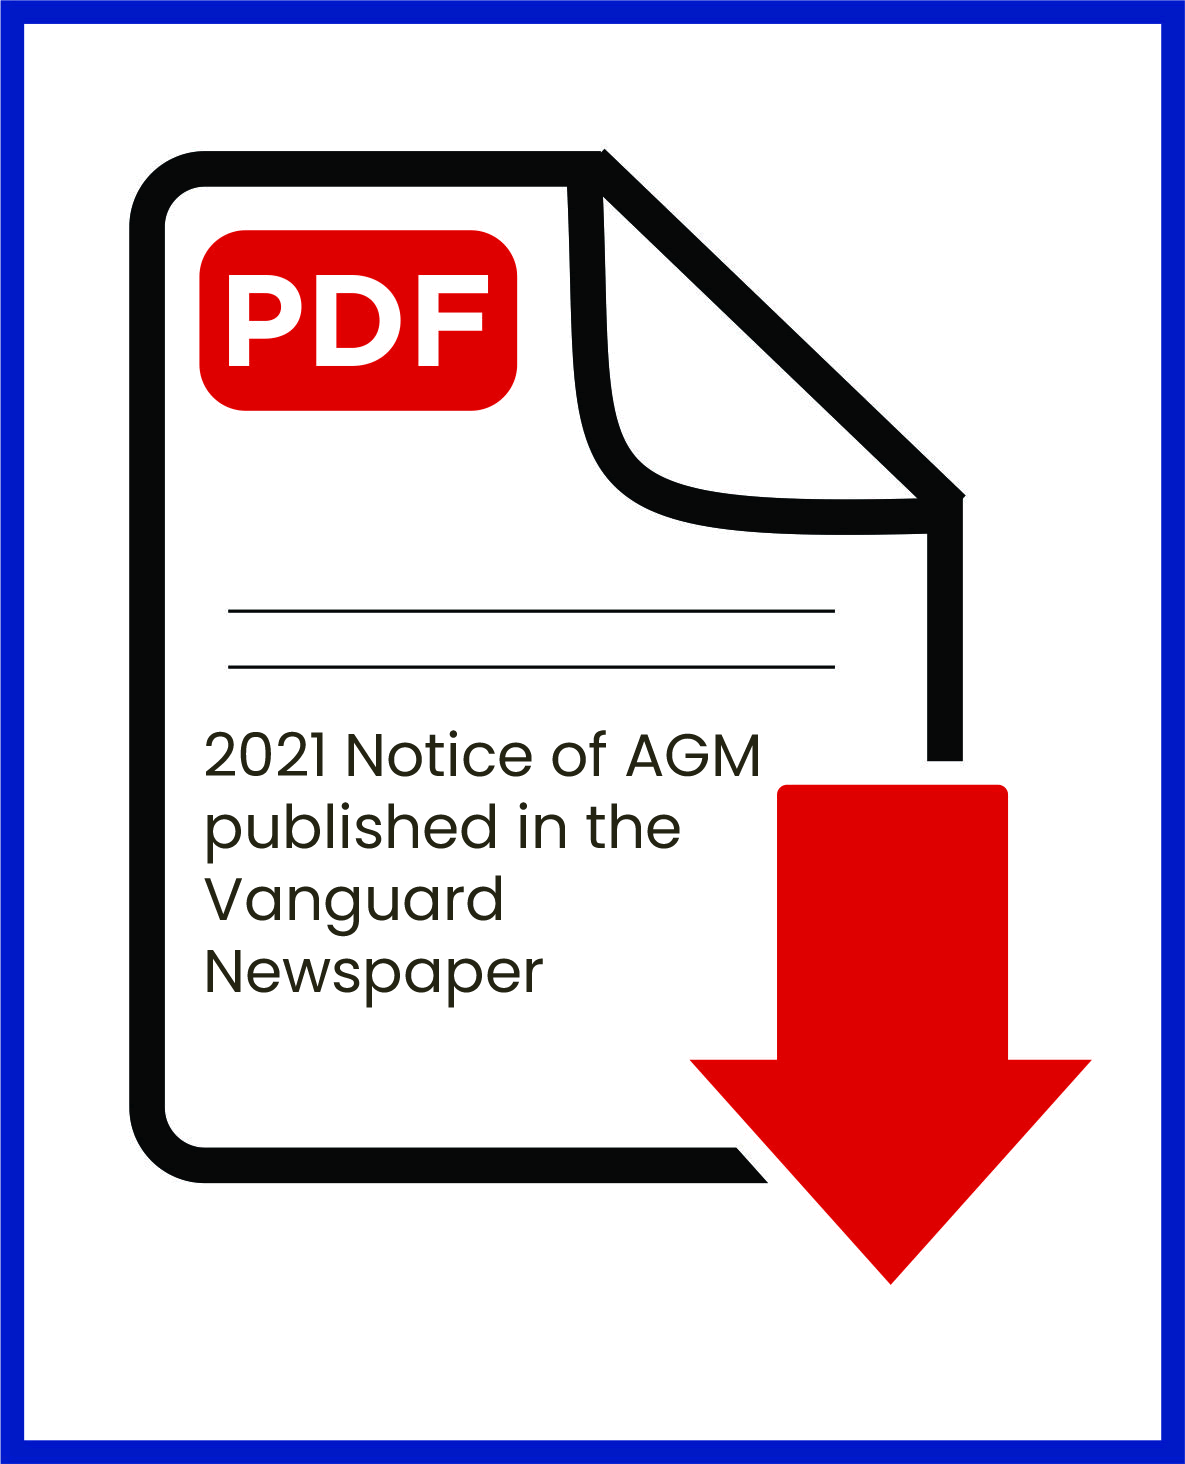 2021 Notice of AGM published in the Vanguard Newspaper